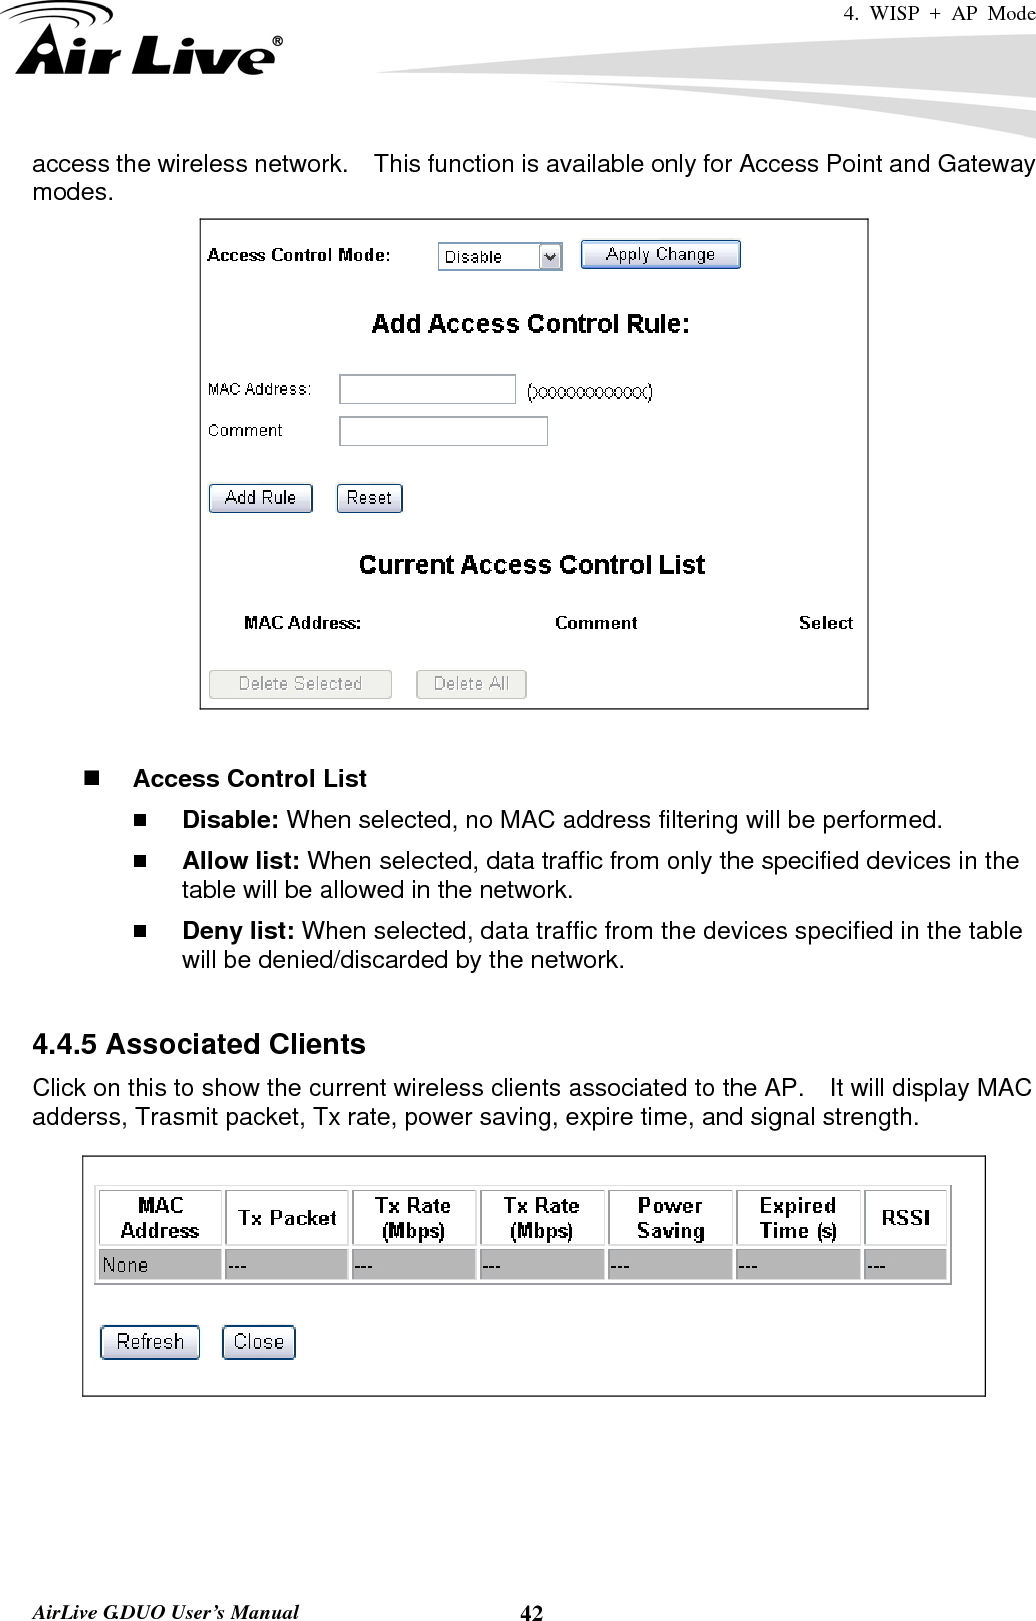 4. WISP + AP Mode   AirLive G.DUO User’s Manual  42access the wireless network.    This function is available only for Access Point and Gateway modes.    Access Control List  Disable: When selected, no MAC address filtering will be performed.    Allow list: When selected, data traffic from only the specified devices in the table will be allowed in the network.    Deny list: When selected, data traffic from the devices specified in the table will be denied/discarded by the network.  4.4.5 Associated Clients Click on this to show the current wireless clients associated to the AP.    It will display MAC adderss, Trasmit packet, Tx rate, power saving, expire time, and signal strength.   